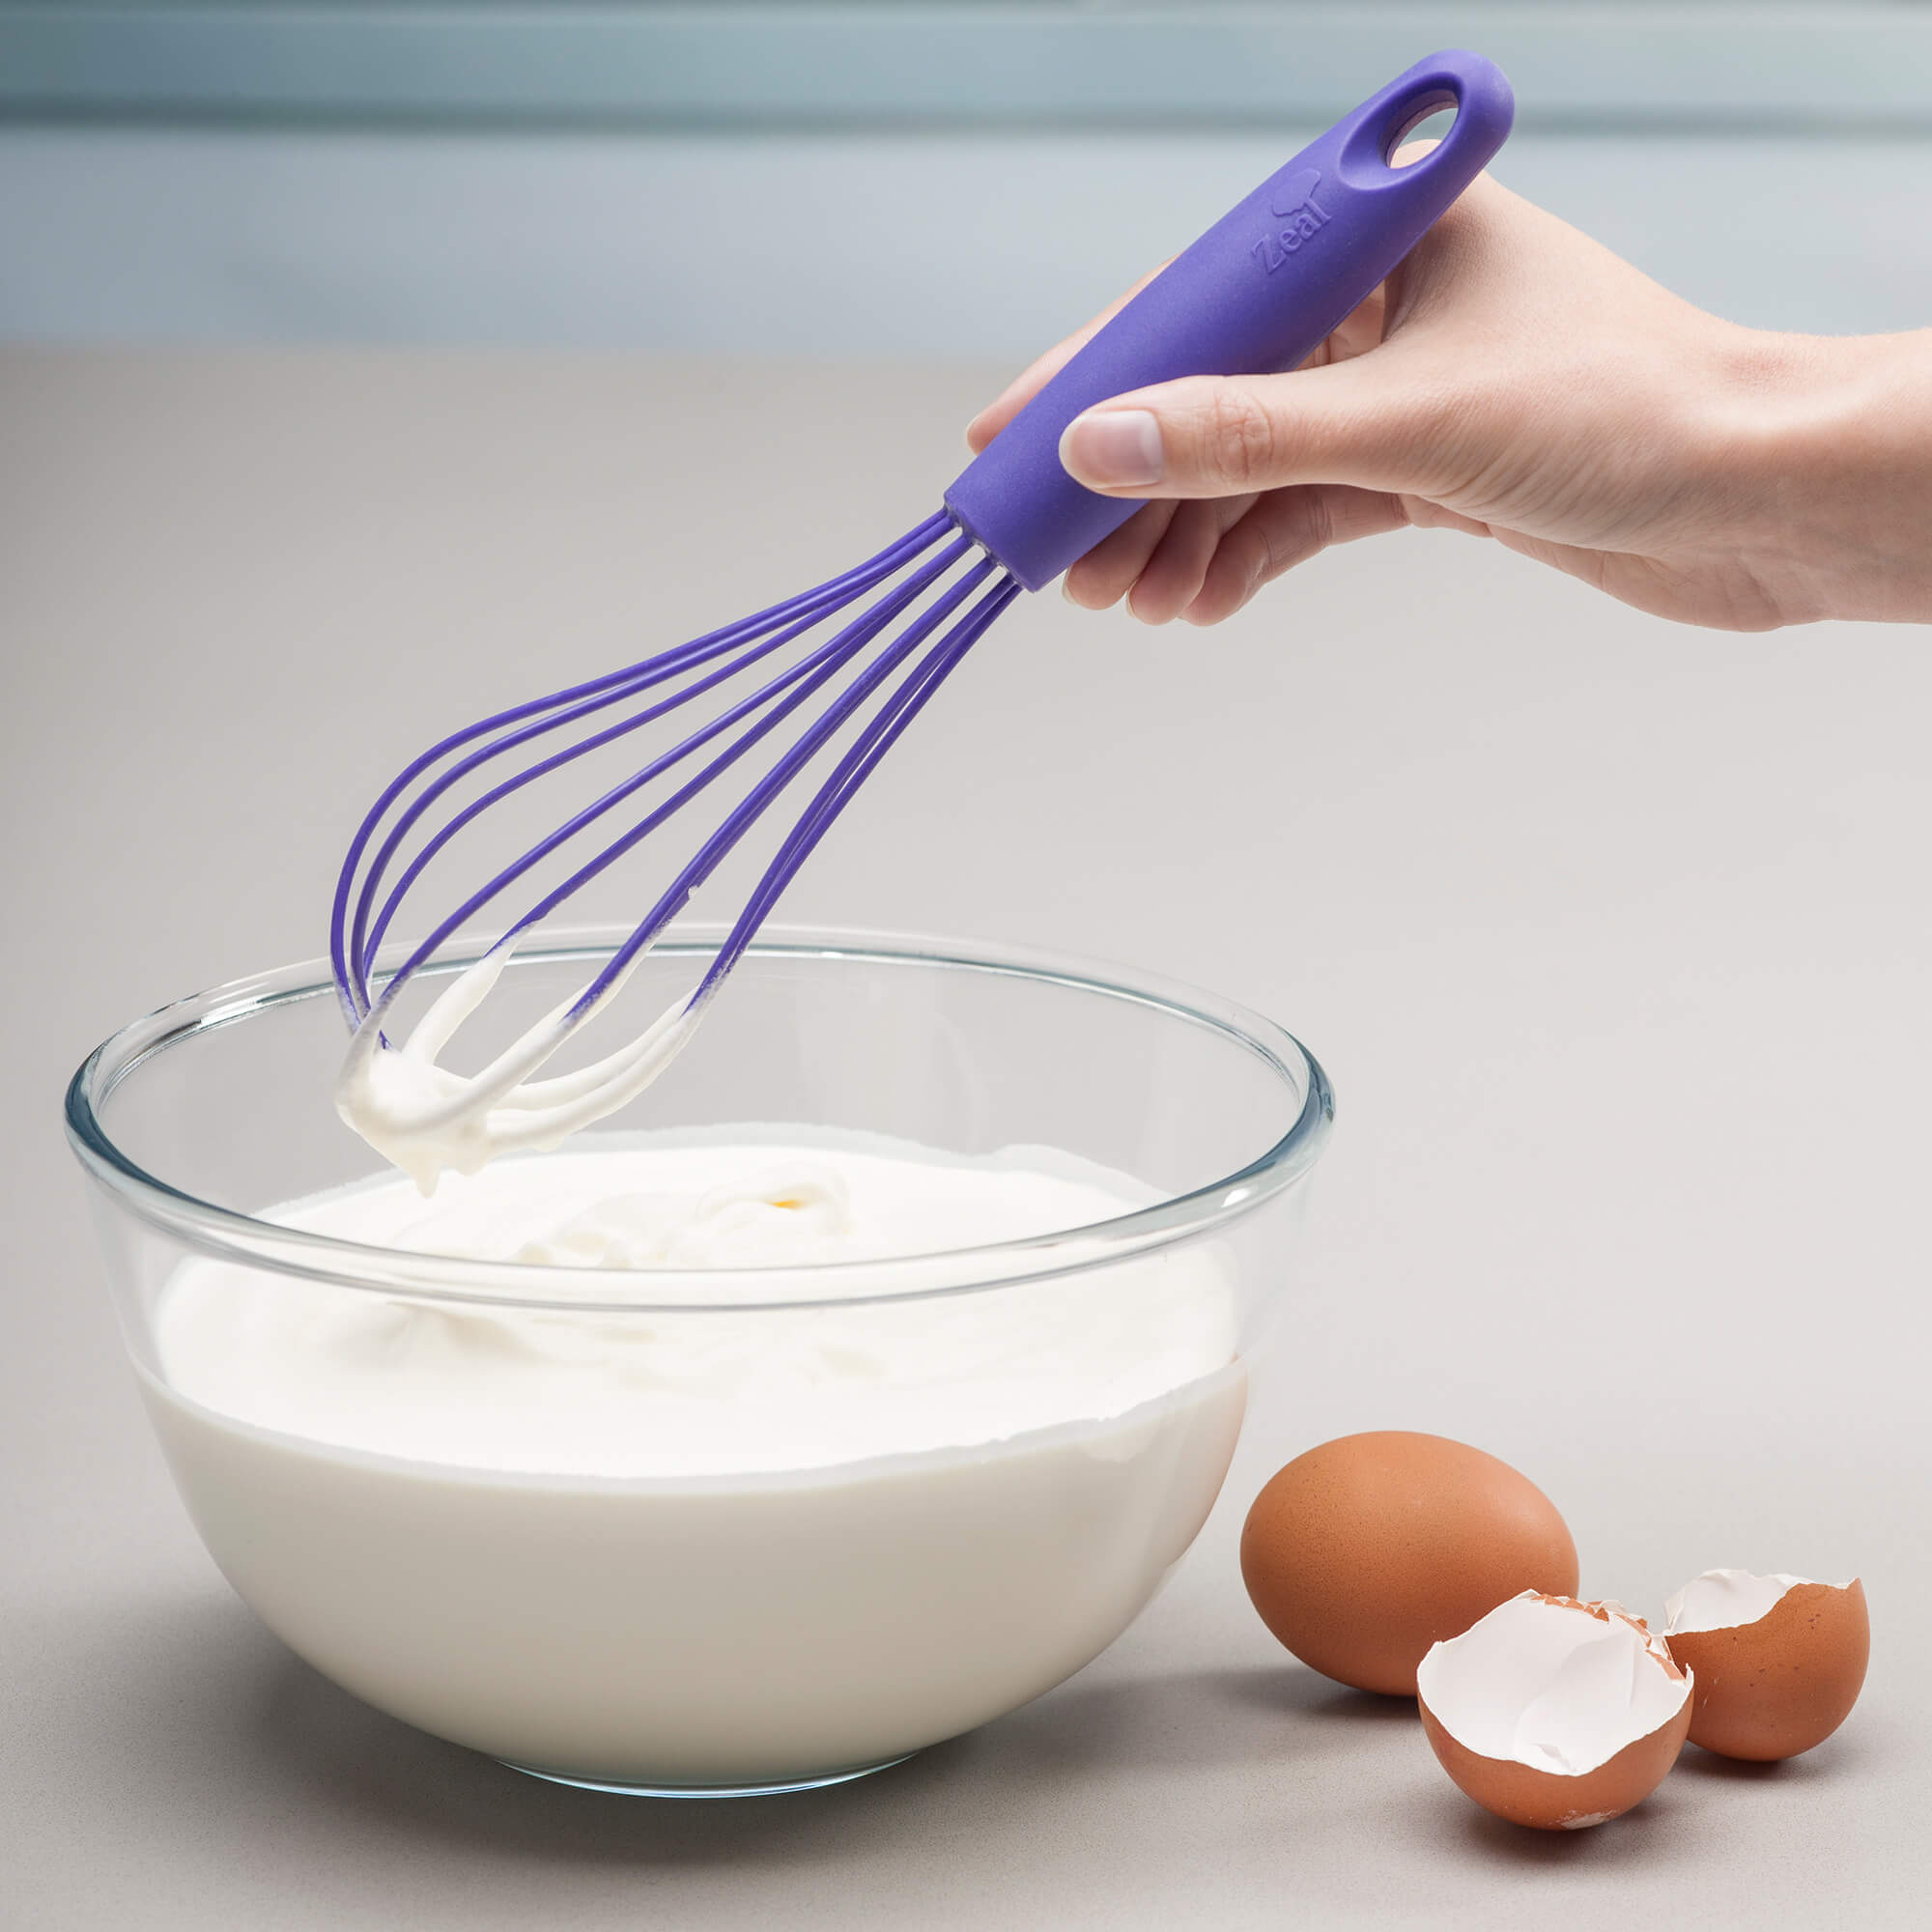 Using a Zeal Silicone Balloon Whisk to whisk cream